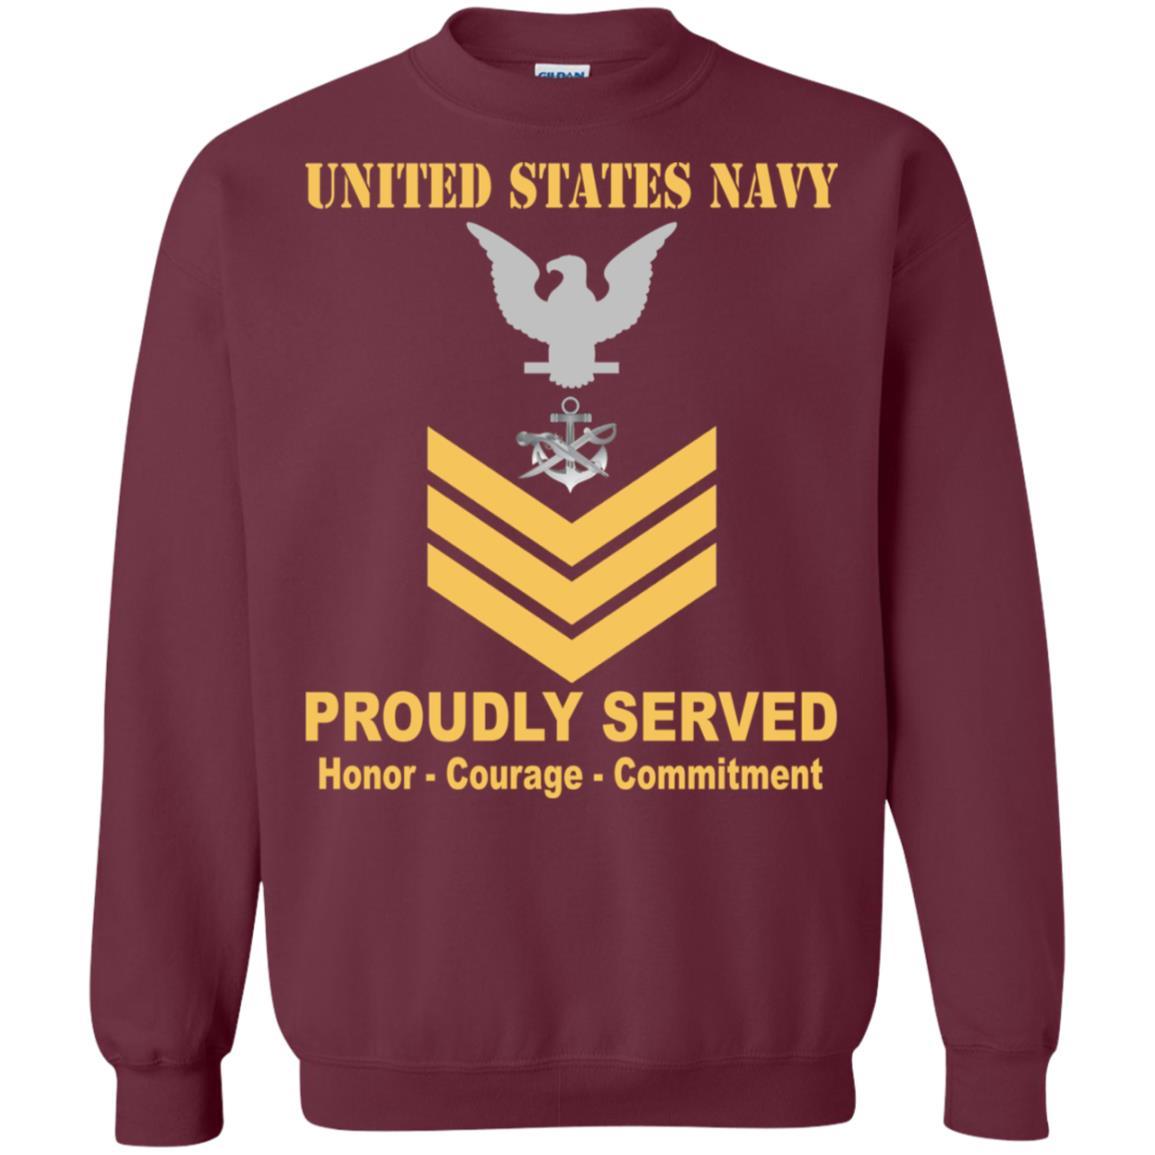 Navy Special Warfare Boat Operator Navy SB E-6 Rating Badges Proudly Served T-Shirt For Men On Front-TShirt-Navy-Veterans Nation